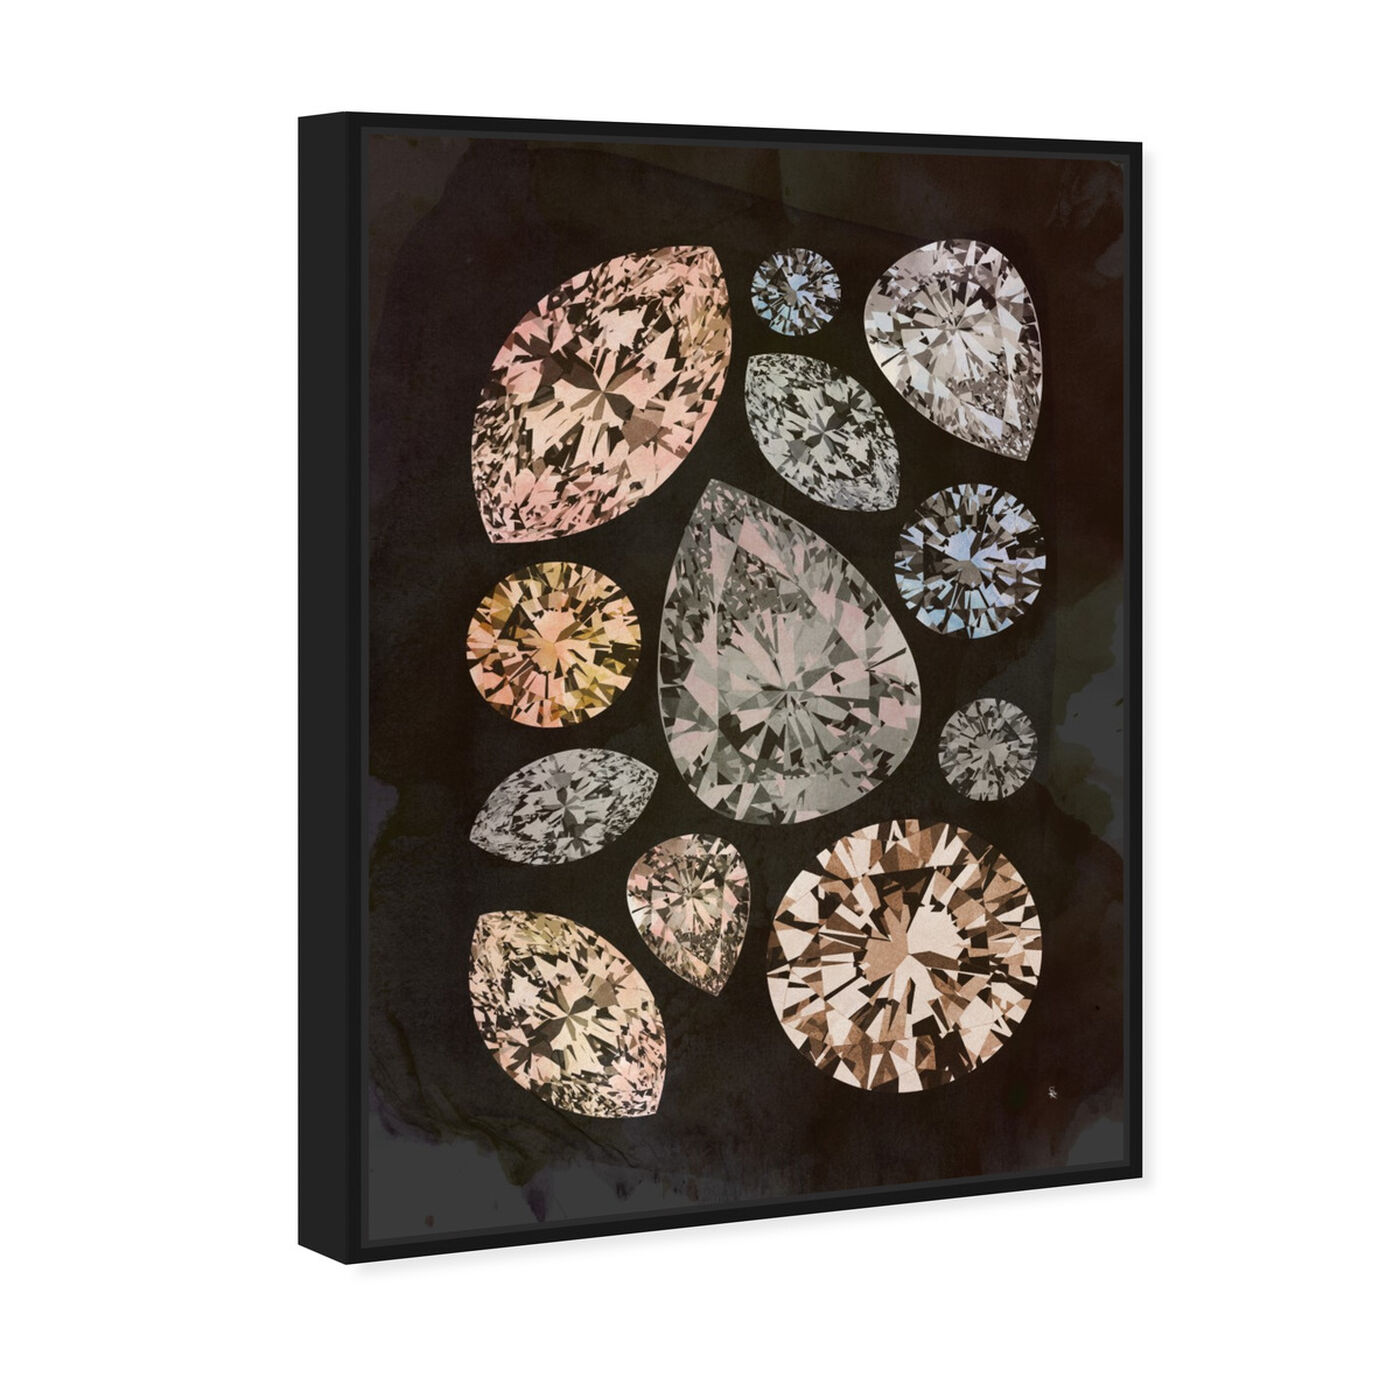 Angled view of Autumn Stones featuring abstract and crystals art.